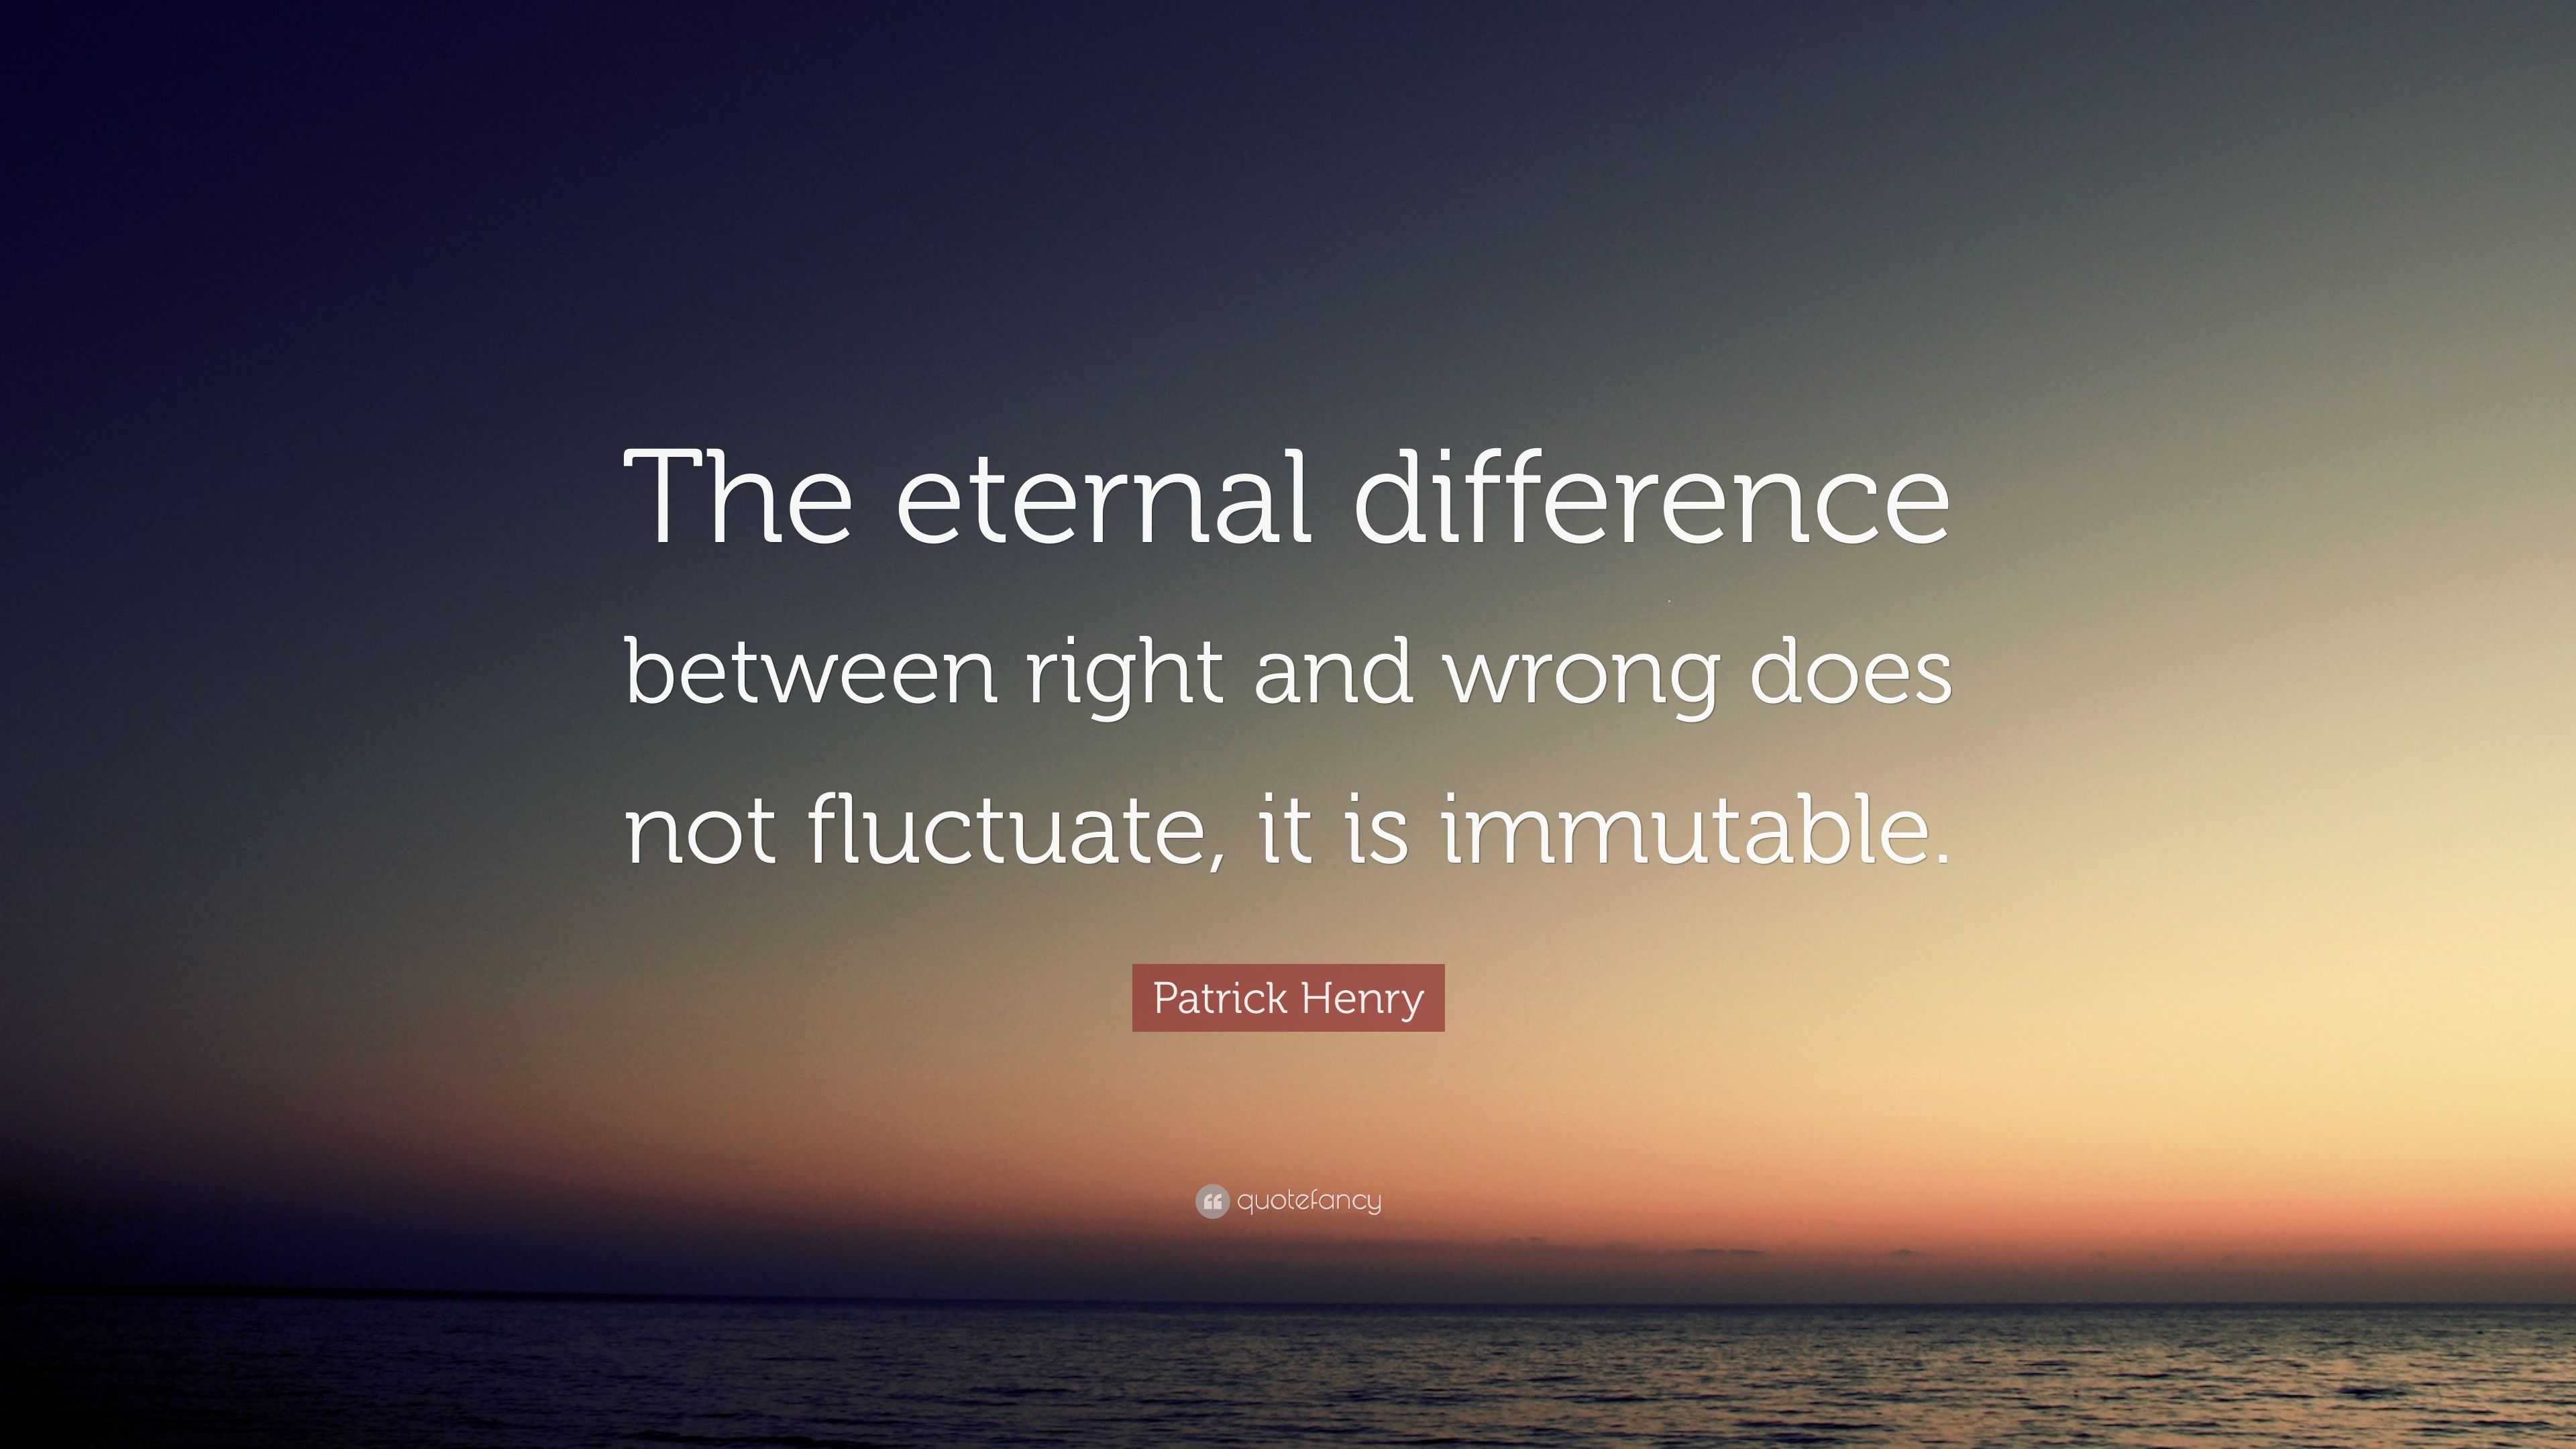 Patrick Henry Quote: “The eternal difference between right and wrong ...